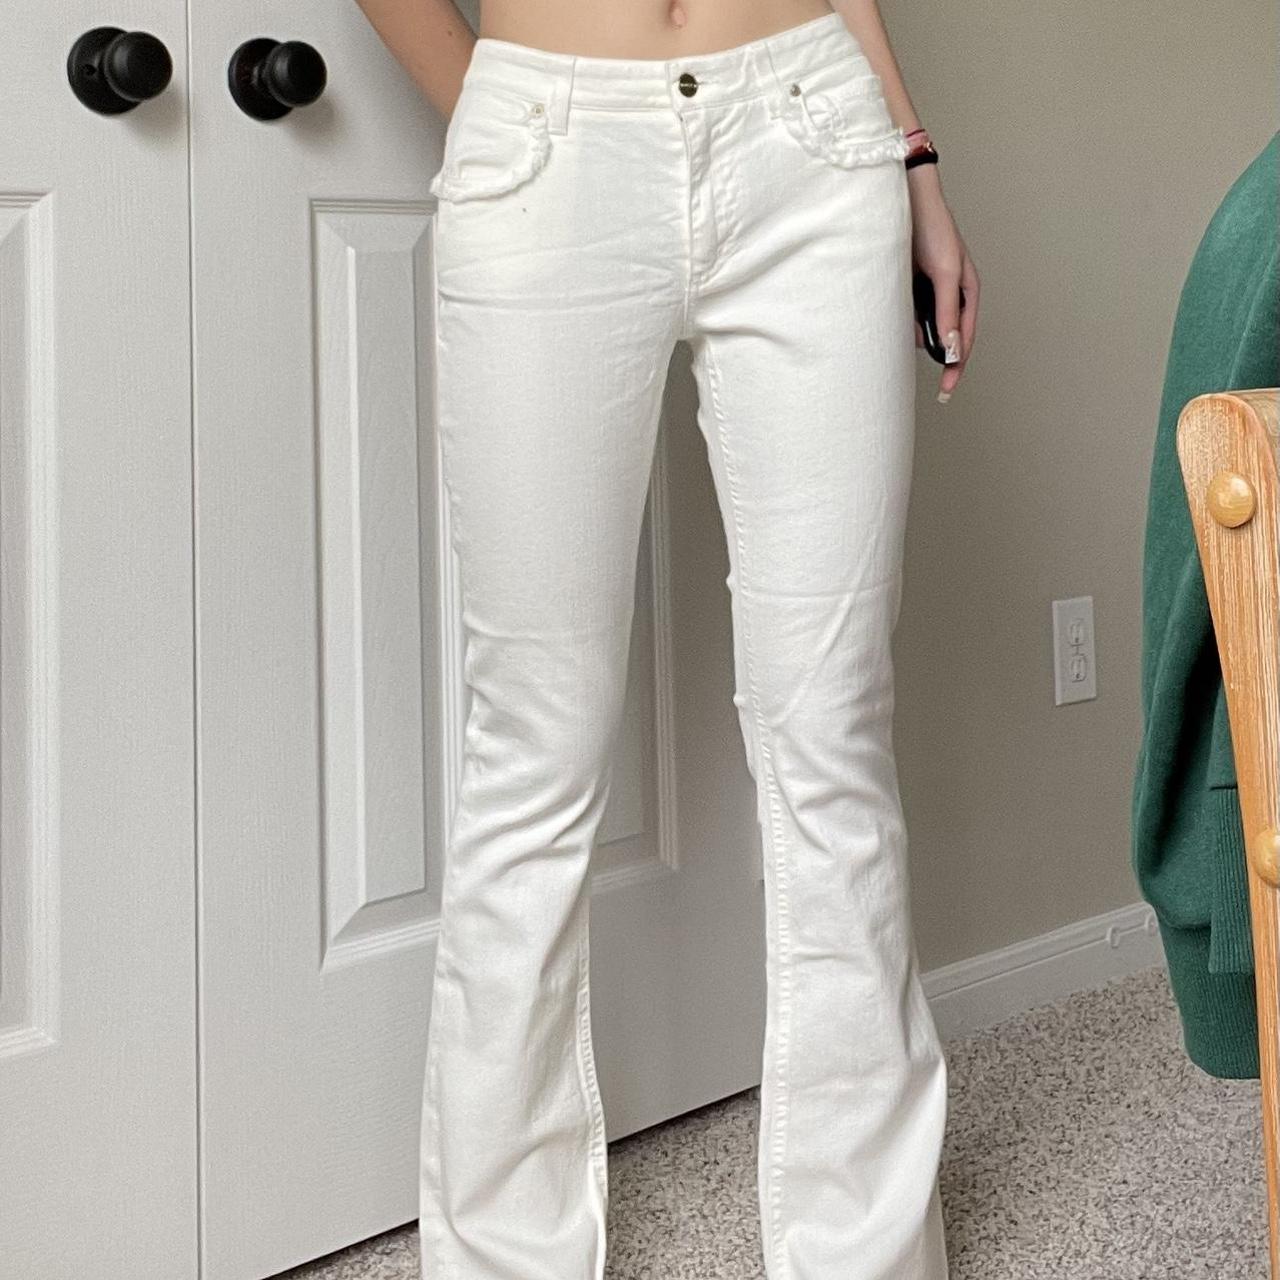 Etro Women's White and Gold Jeans